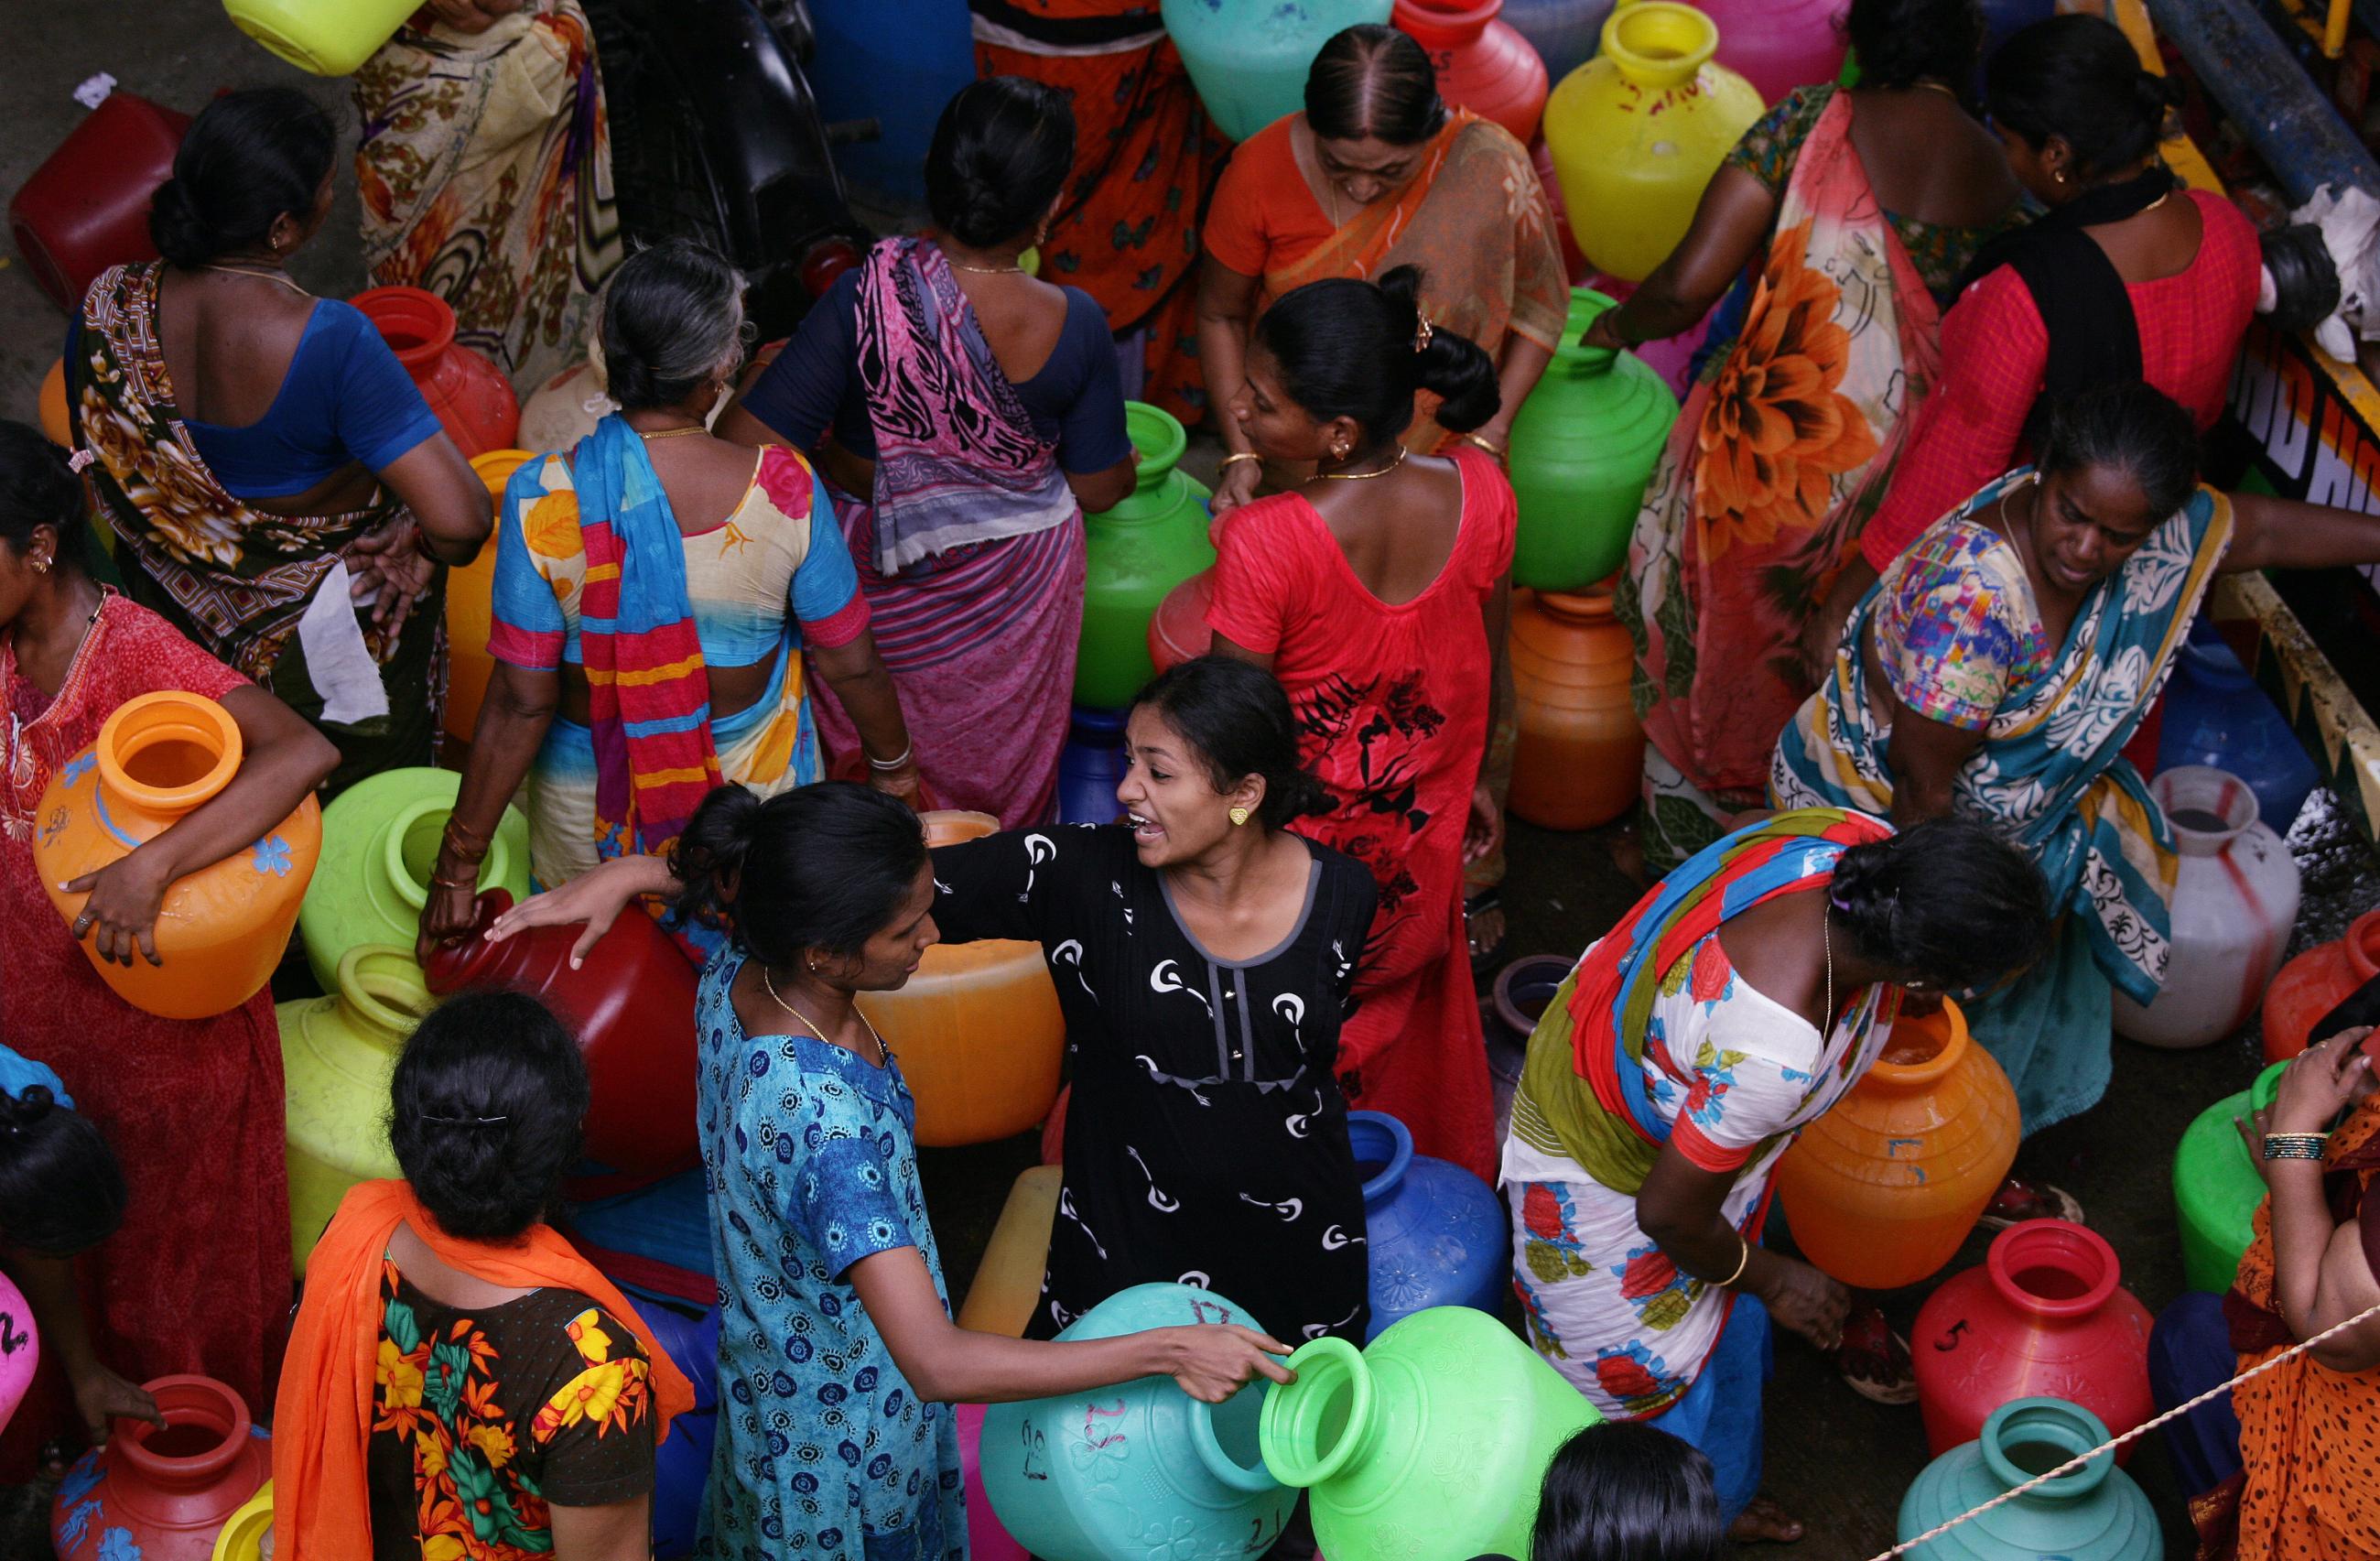 Residents gather to fill empty containers with water from a municipal tanker during a period of extreme drought in Chennai, India, June 25, 2019. 